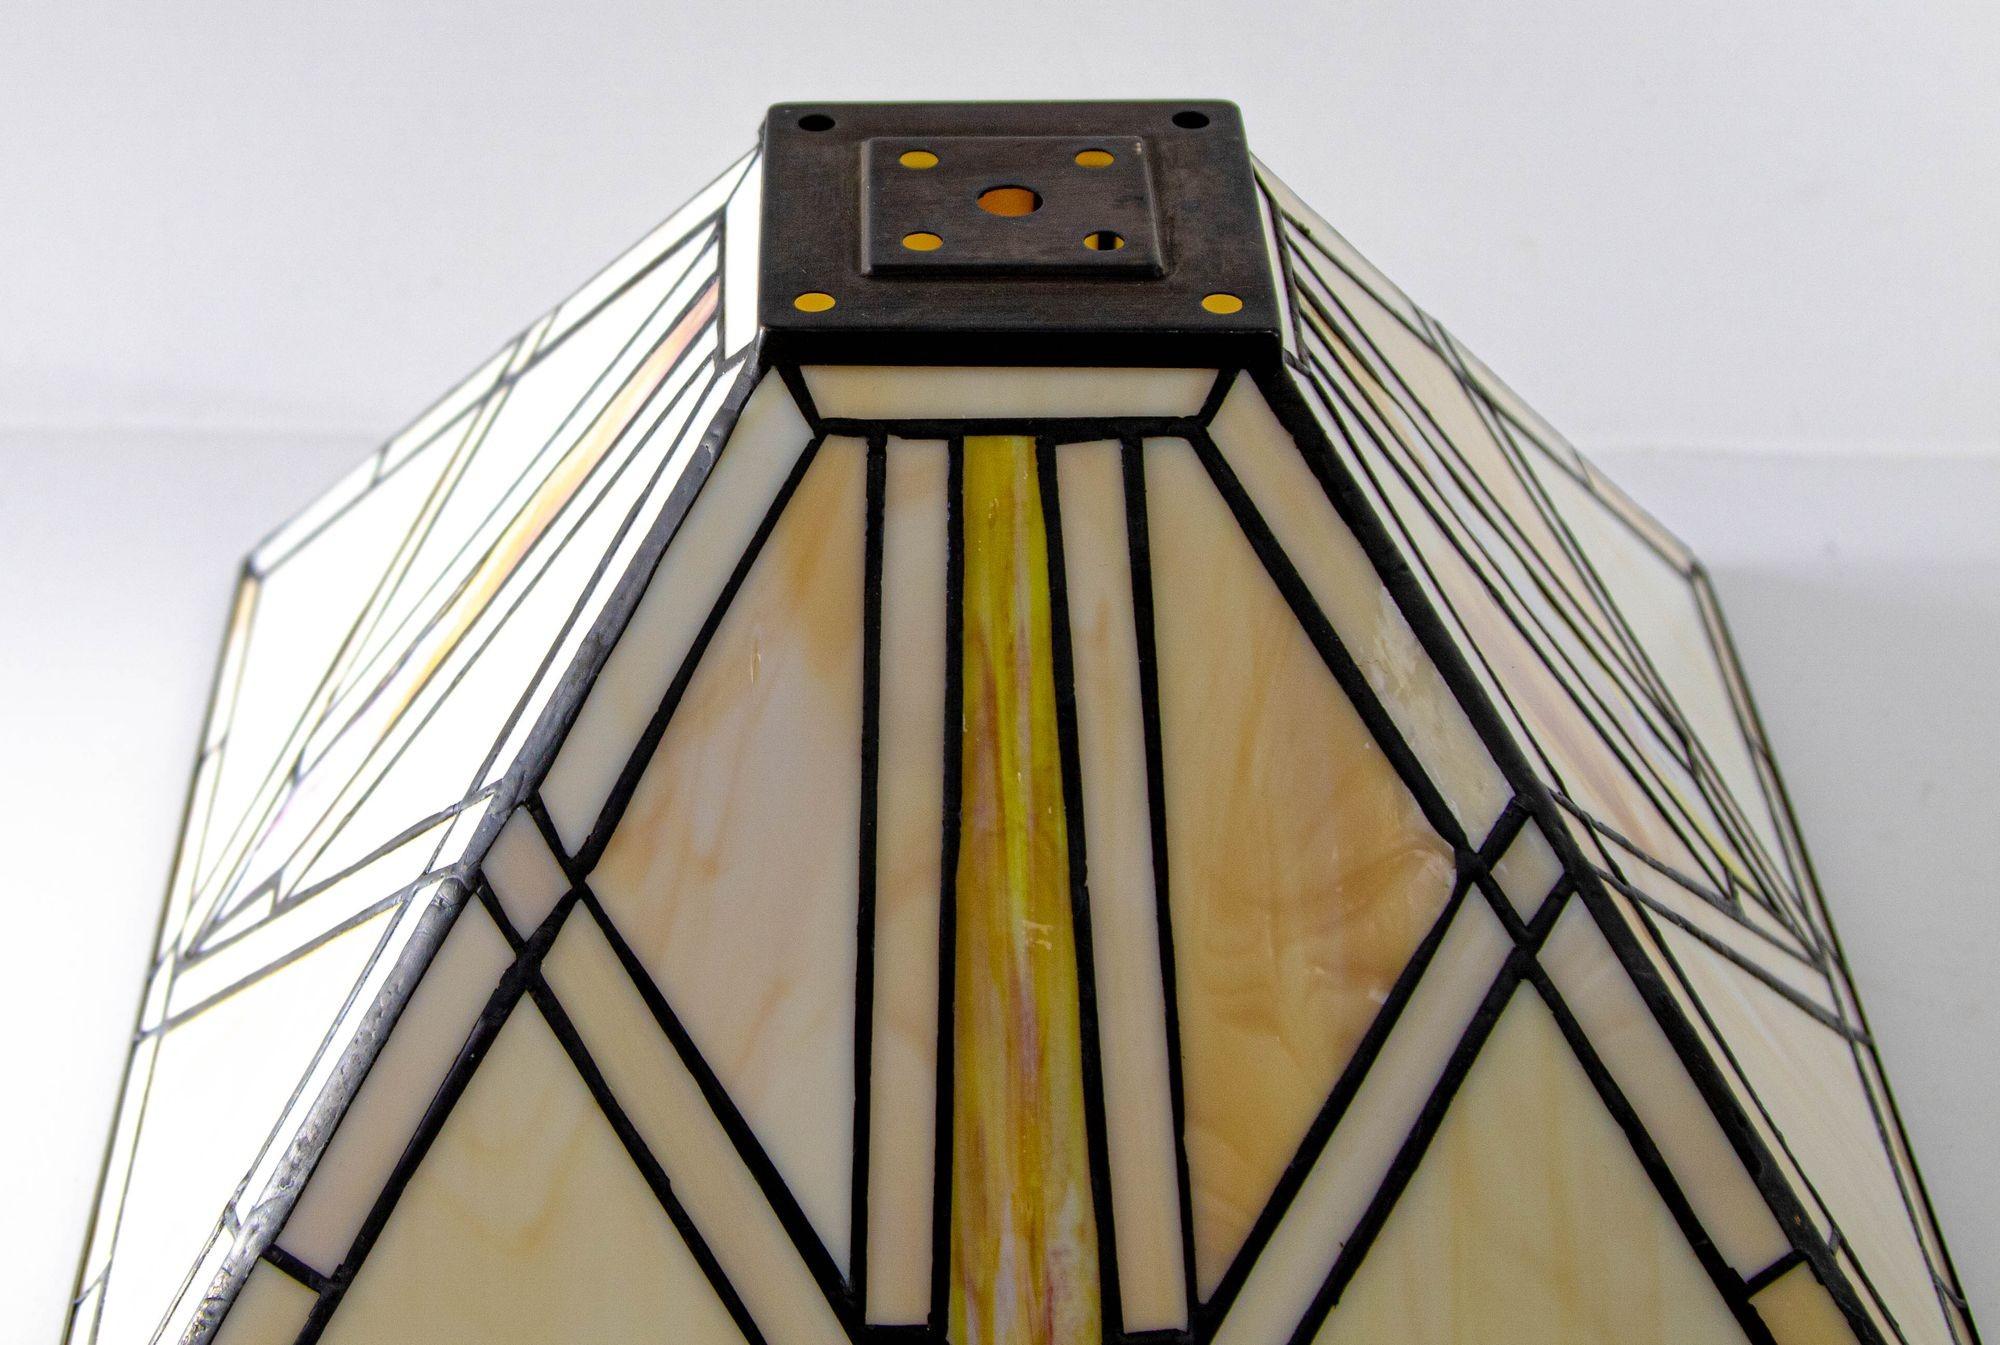 Vintage Arts & Crafts Mission Frank Lloyd Wright style stained glass lamp shade.
Large square shape vintage hand crafted table lamp shade with intricate designed with mosaic of cut glass each accentuating one another in soft hues of colors in beige